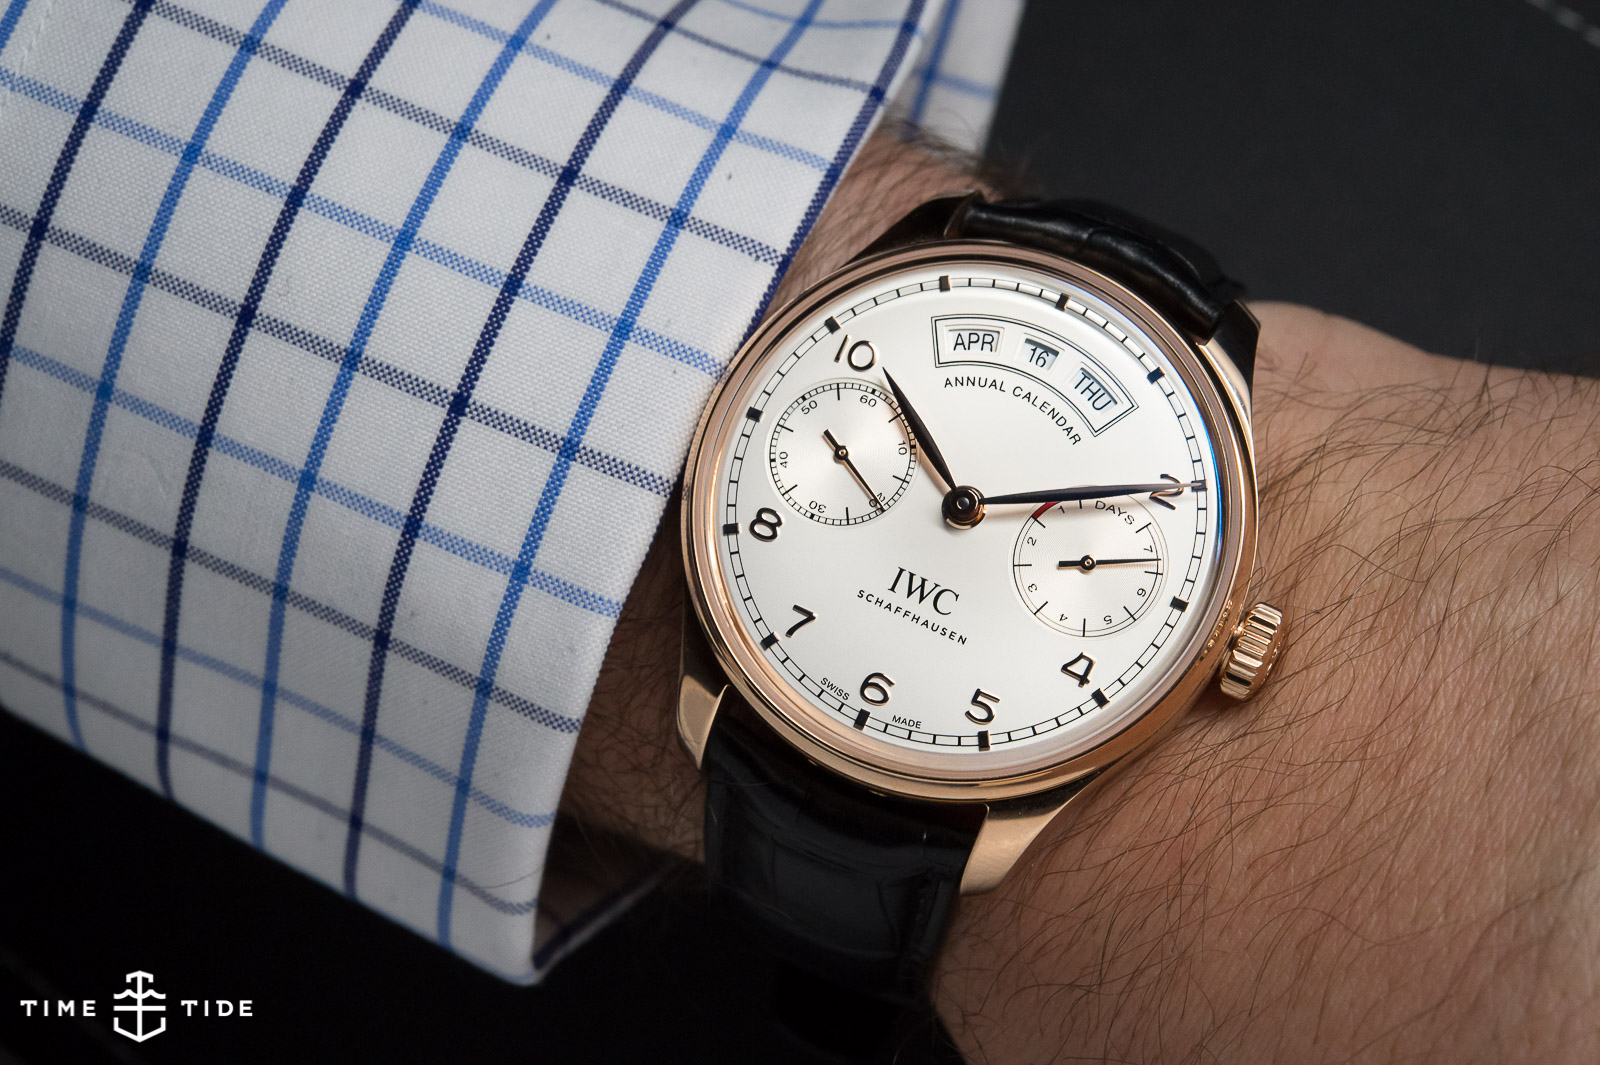 IWC Portugieser Annual Calendar Hands On Review